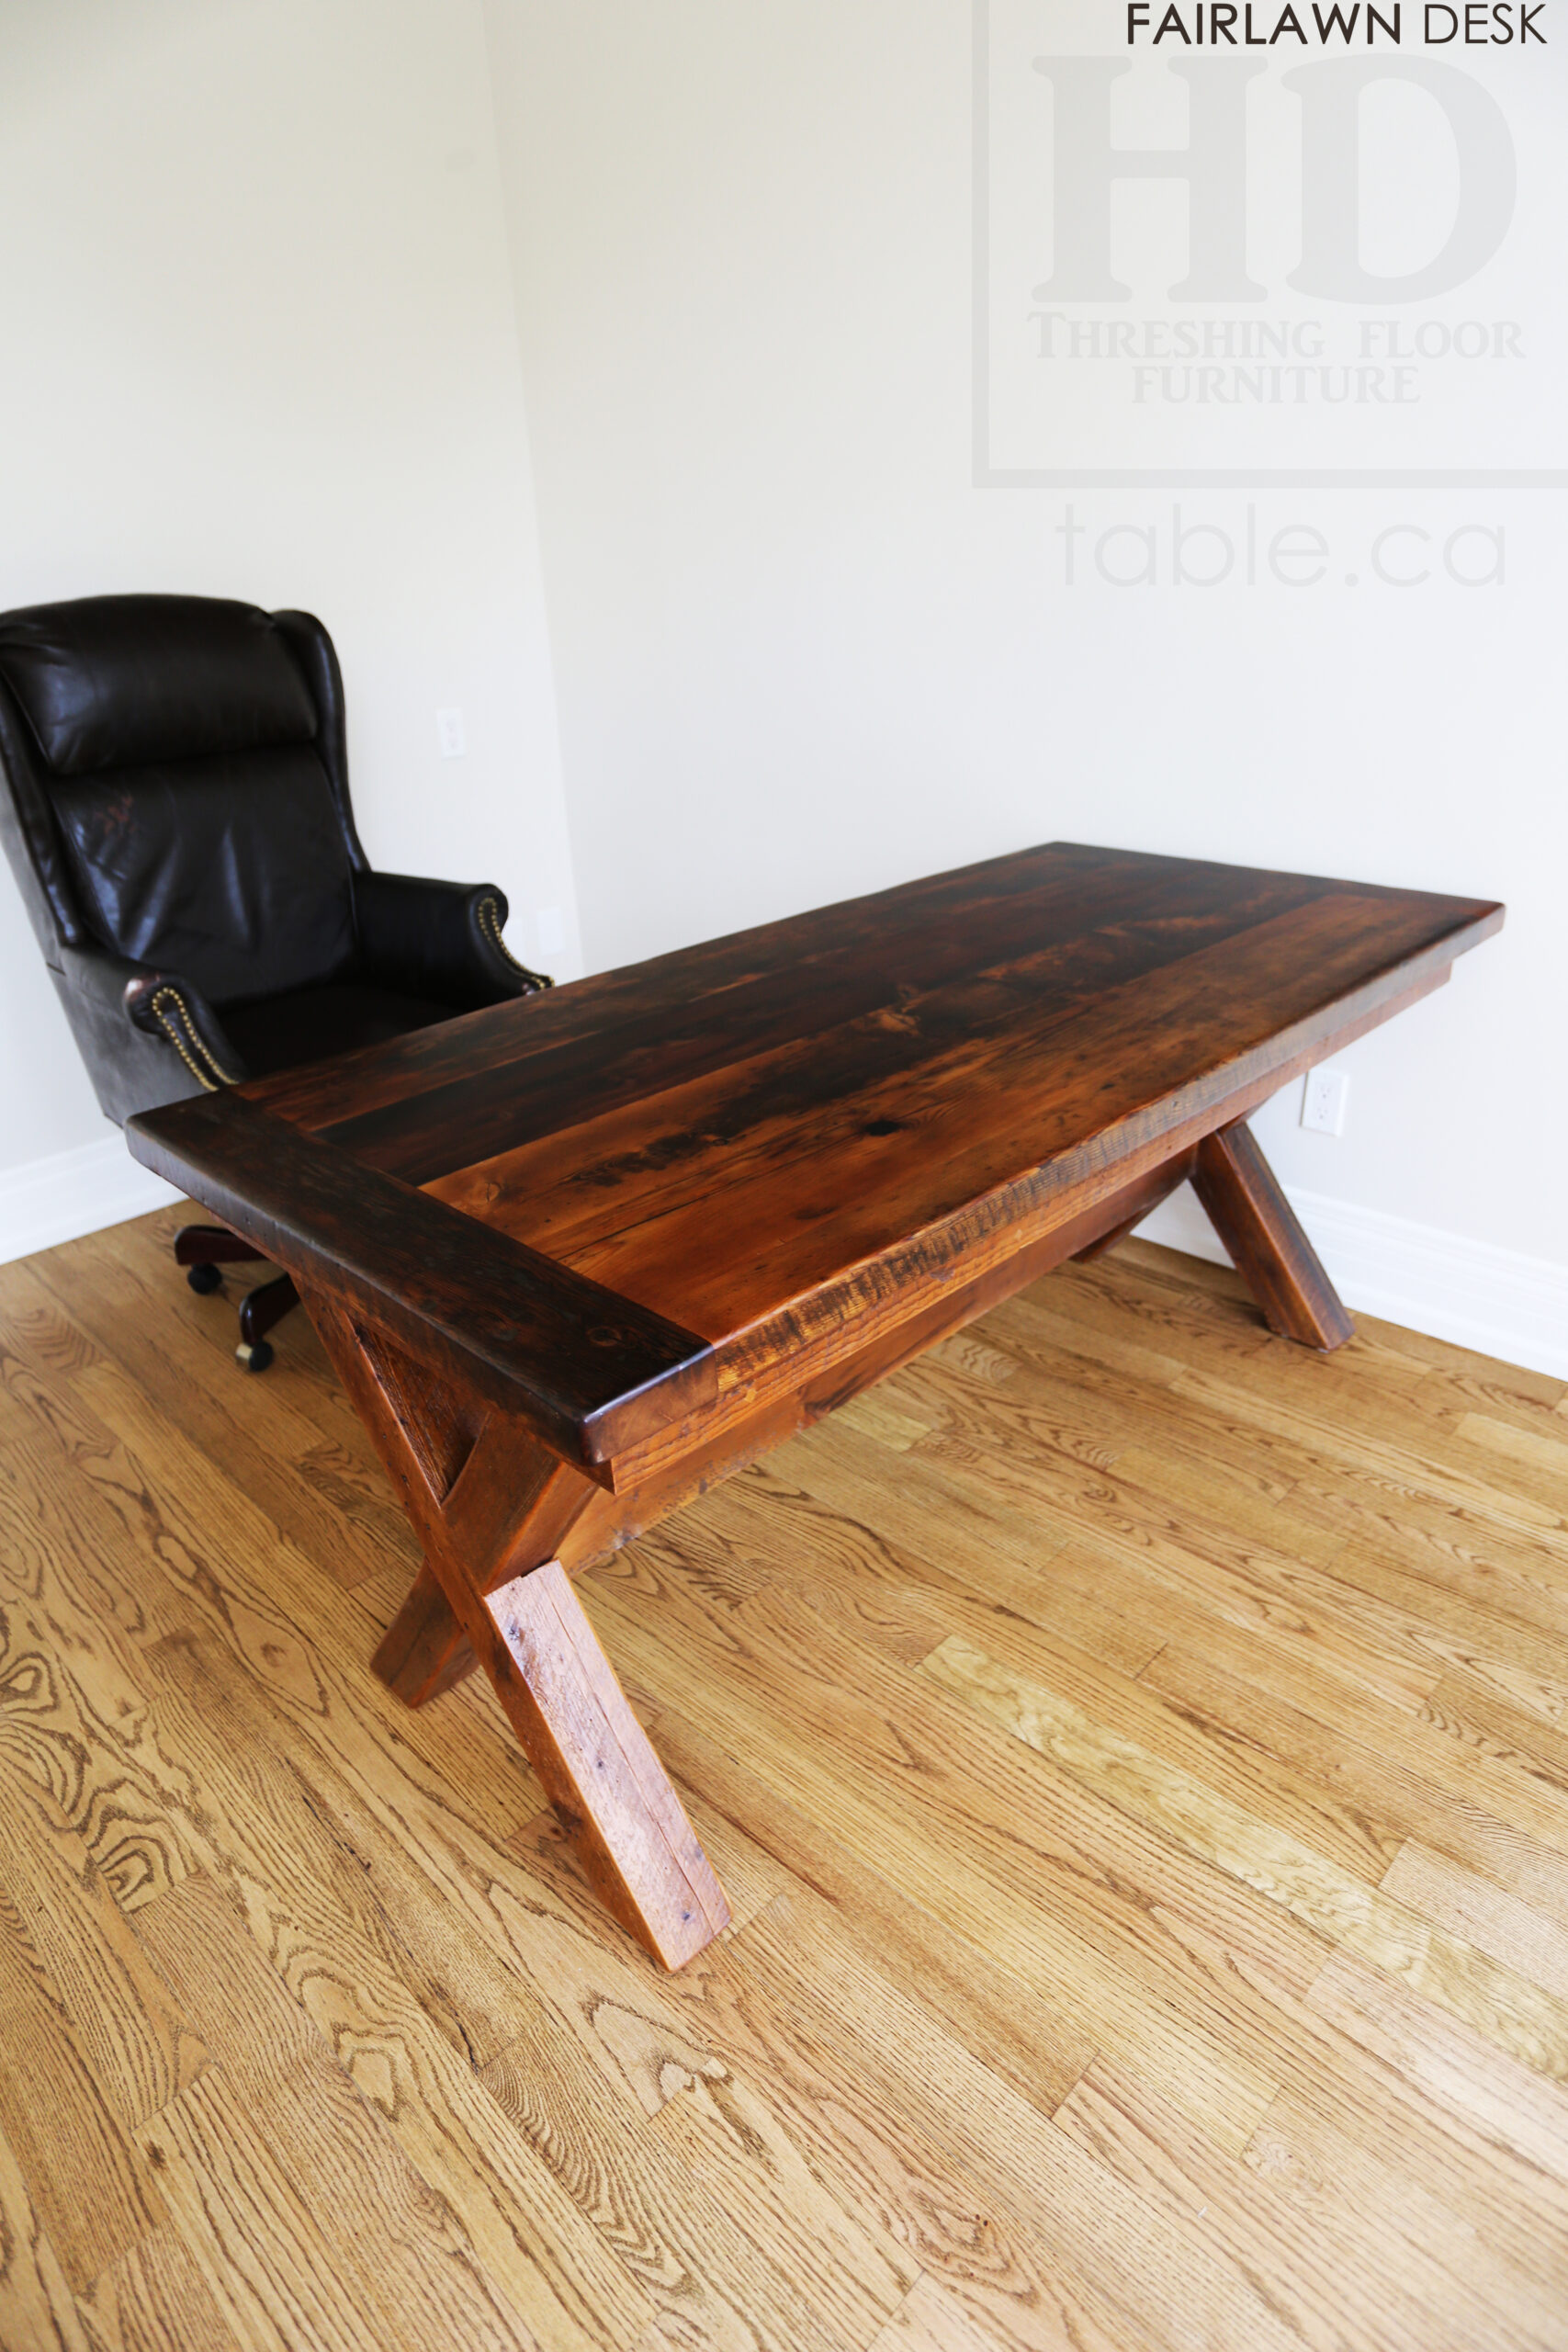 5’ 8” Reclaimed Ontario Barnwood Desk we made for a Toronto, Ontario home – 32” wide –4”x4” Windbrace Beam X Base – 3” skirting – 2 Drawers / Lee Valley Hardware Cast Brass Handles - Old Growth Hemlock Threshing Floor & Grainery Board Construction - Original edges & distressing maintained – Bread Edge Board Ends – Premium epoxy + matte polyurethane finish – Mission Cast Brass Lee Valley Hardware - www.table.ca